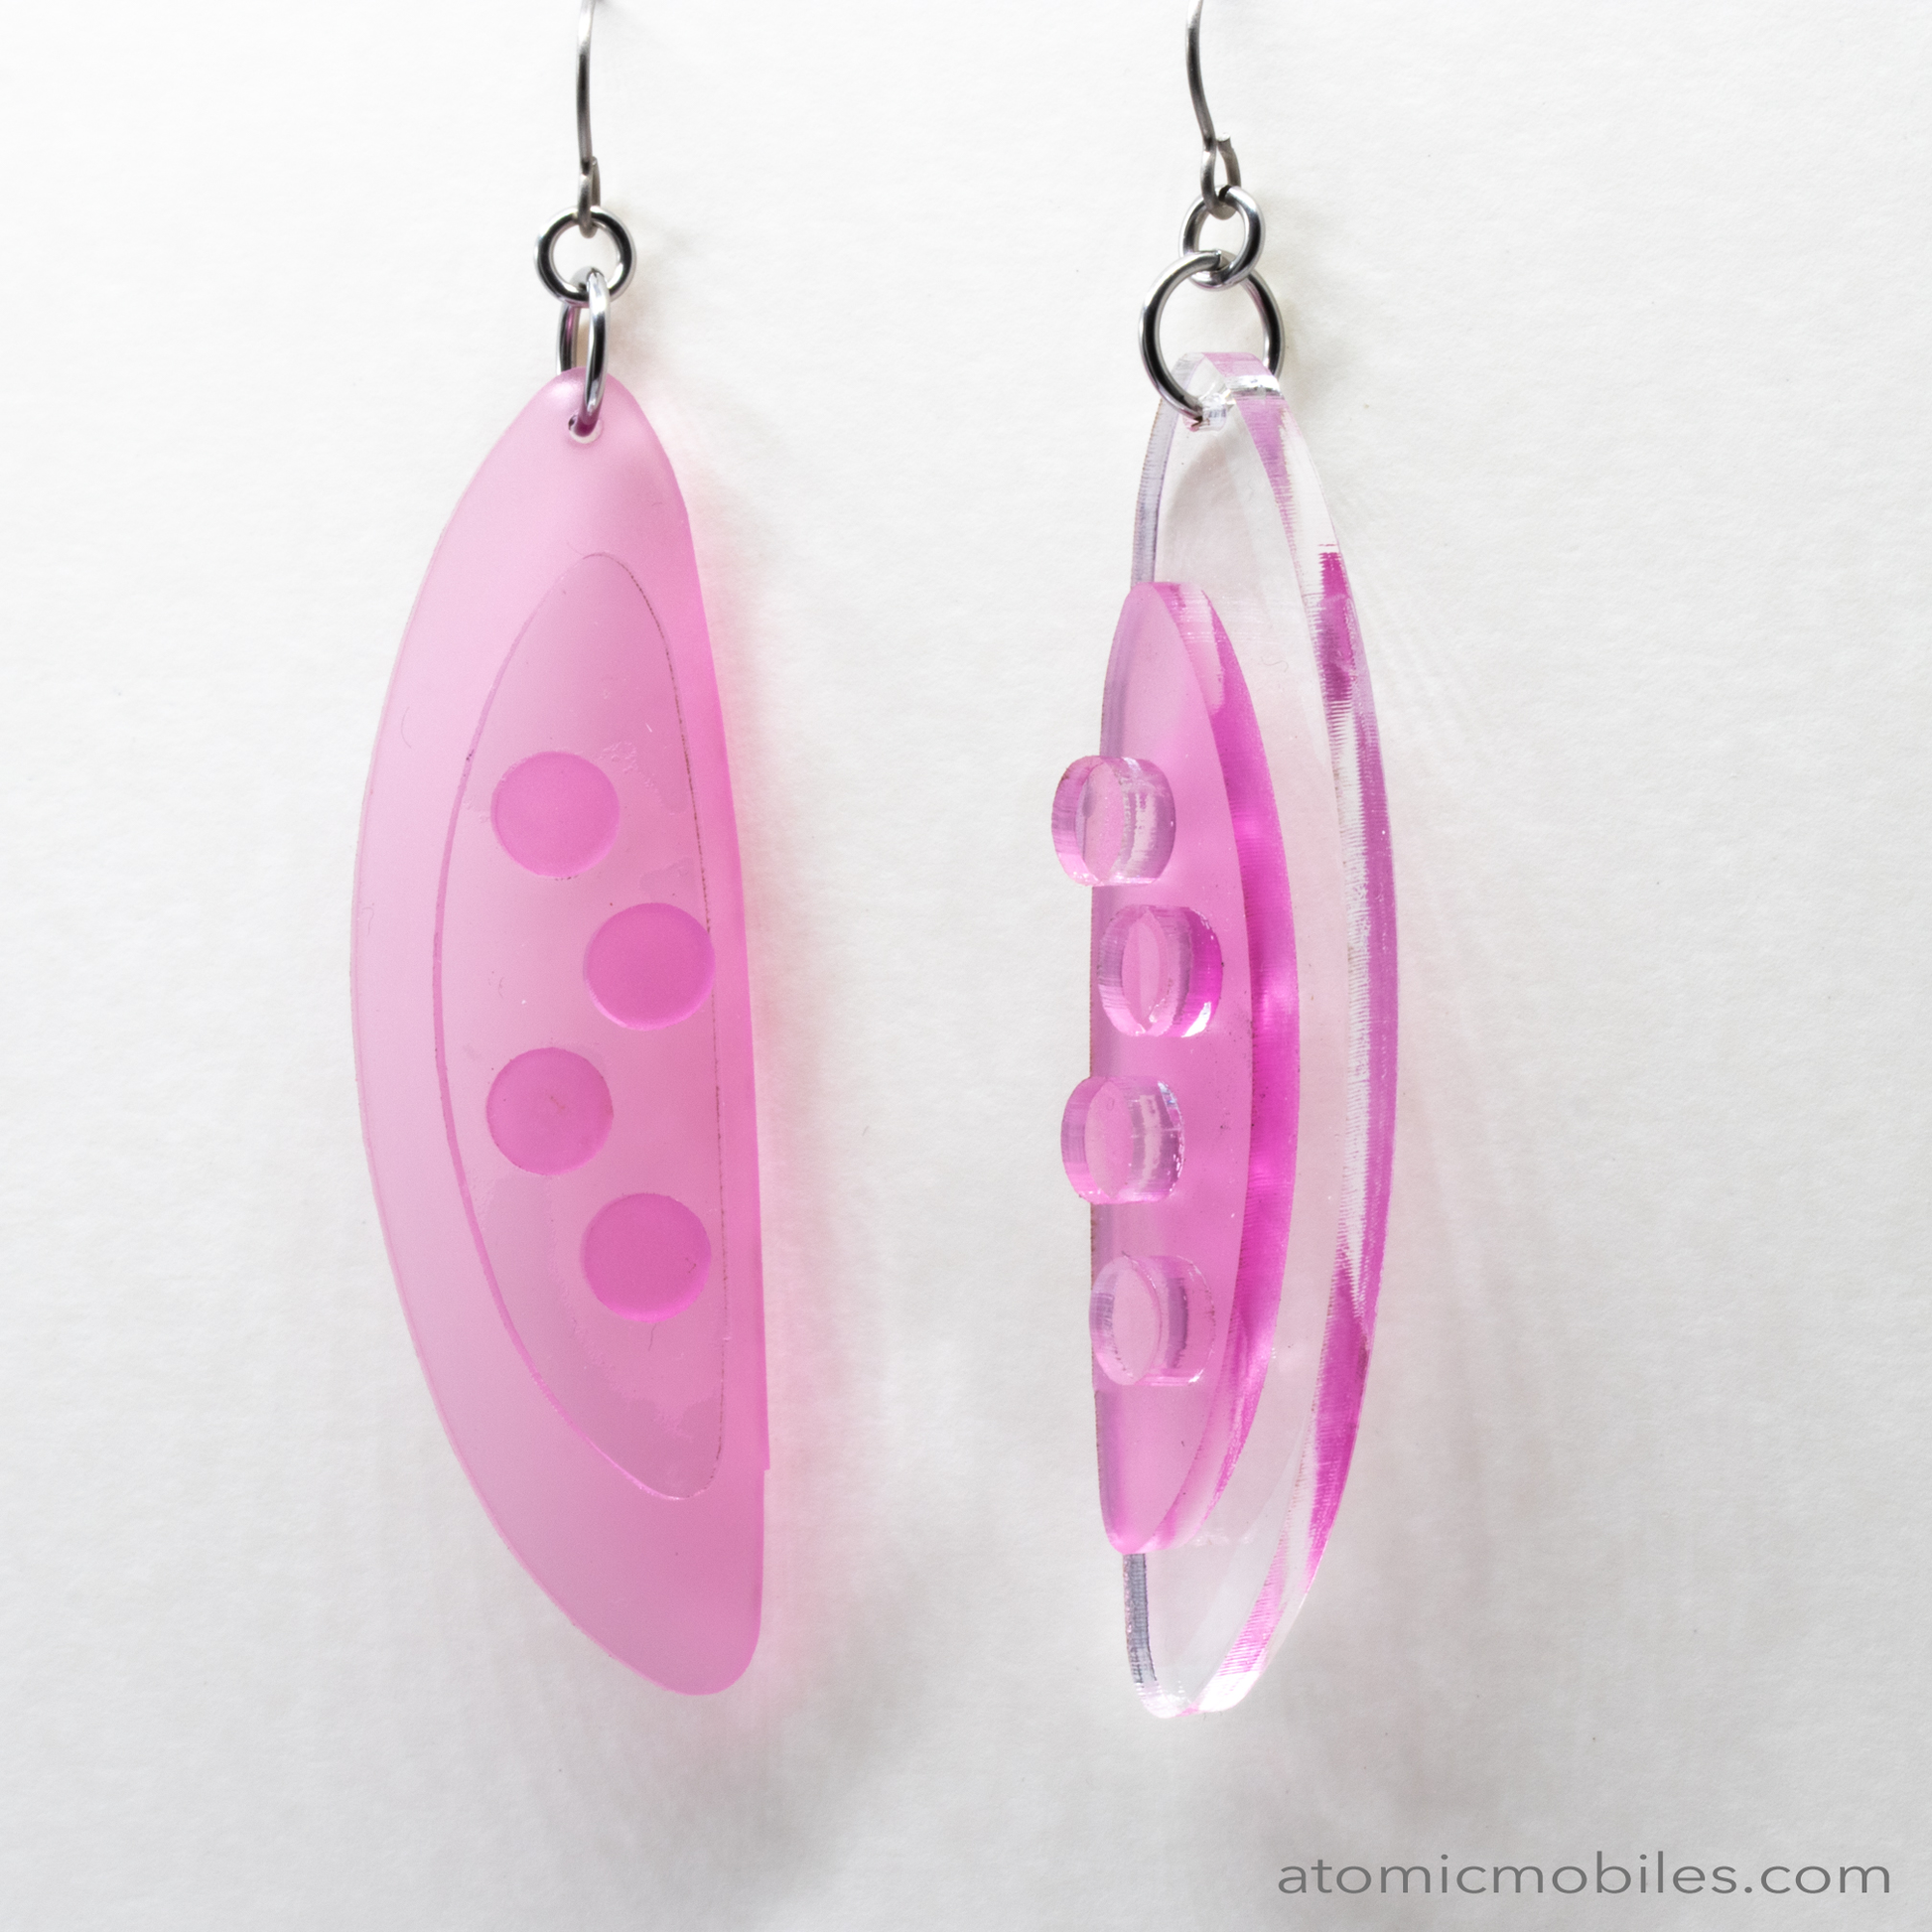 POPdots modern retro statement earrings in Frosty Pink and Clear acrylic by AtomicMobiles.com